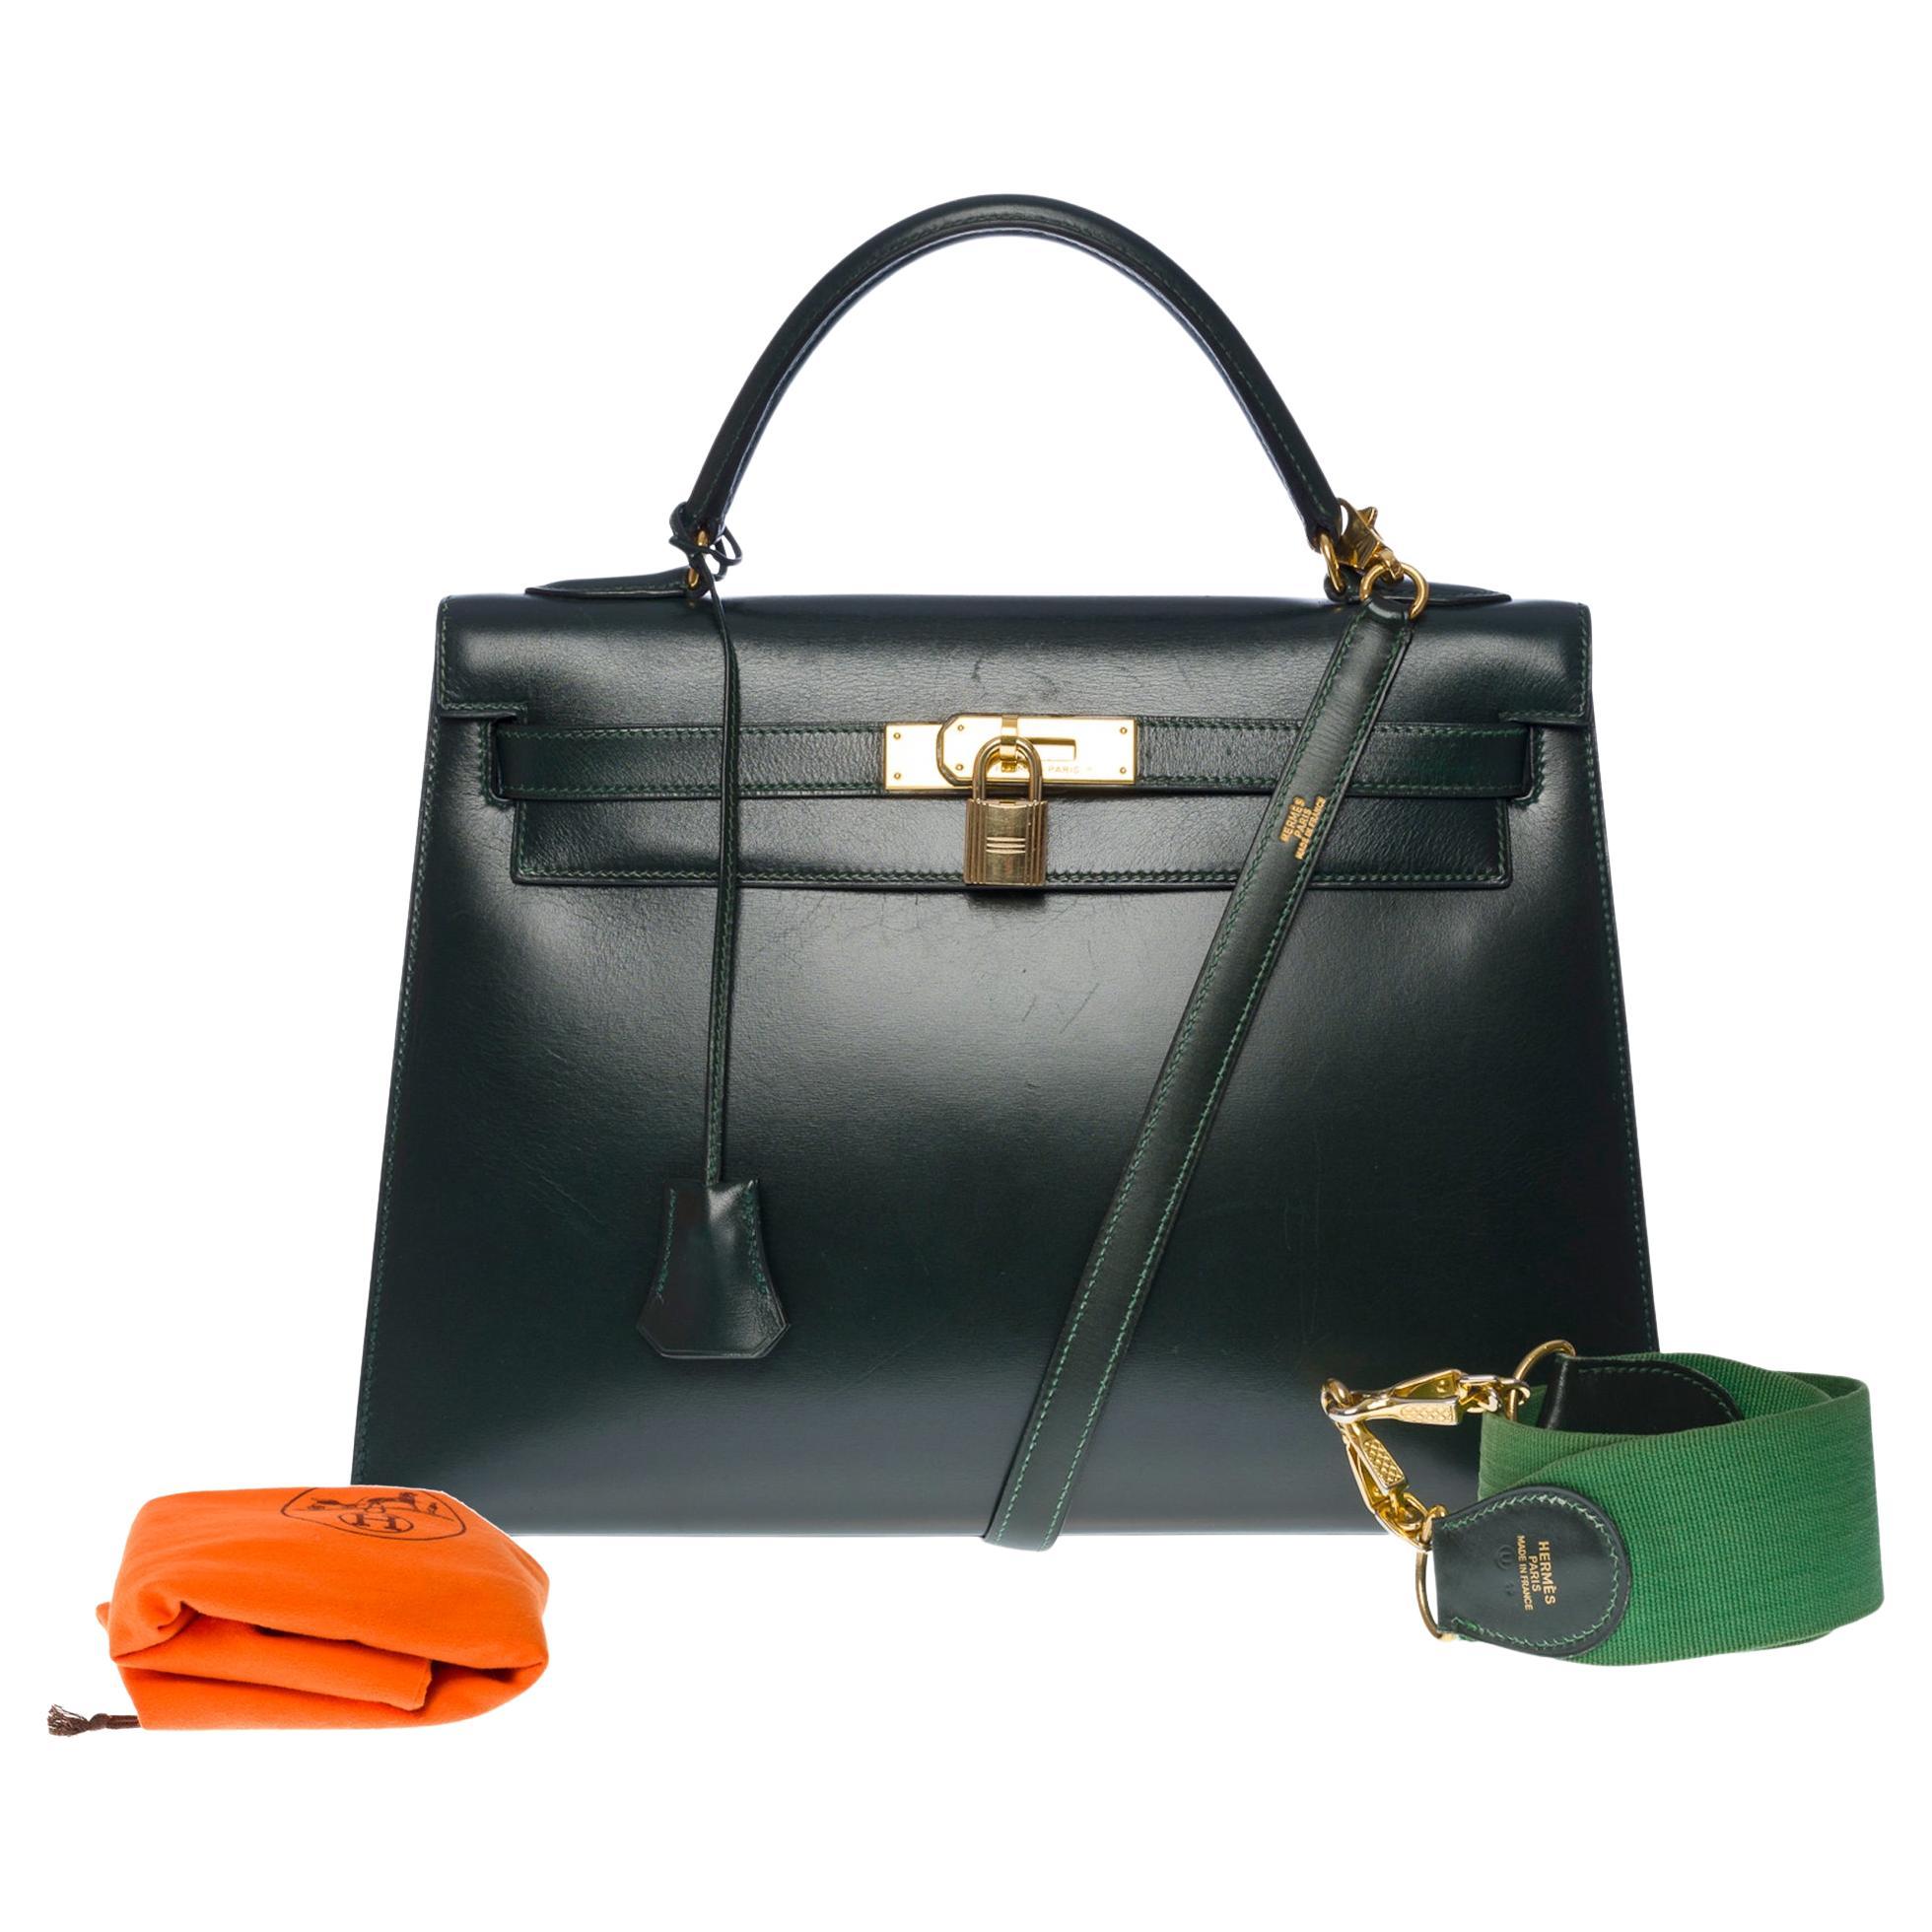 Rare Hermès Kelly 32 sellier handbag double straps in green box calf leather, GHW For Sale